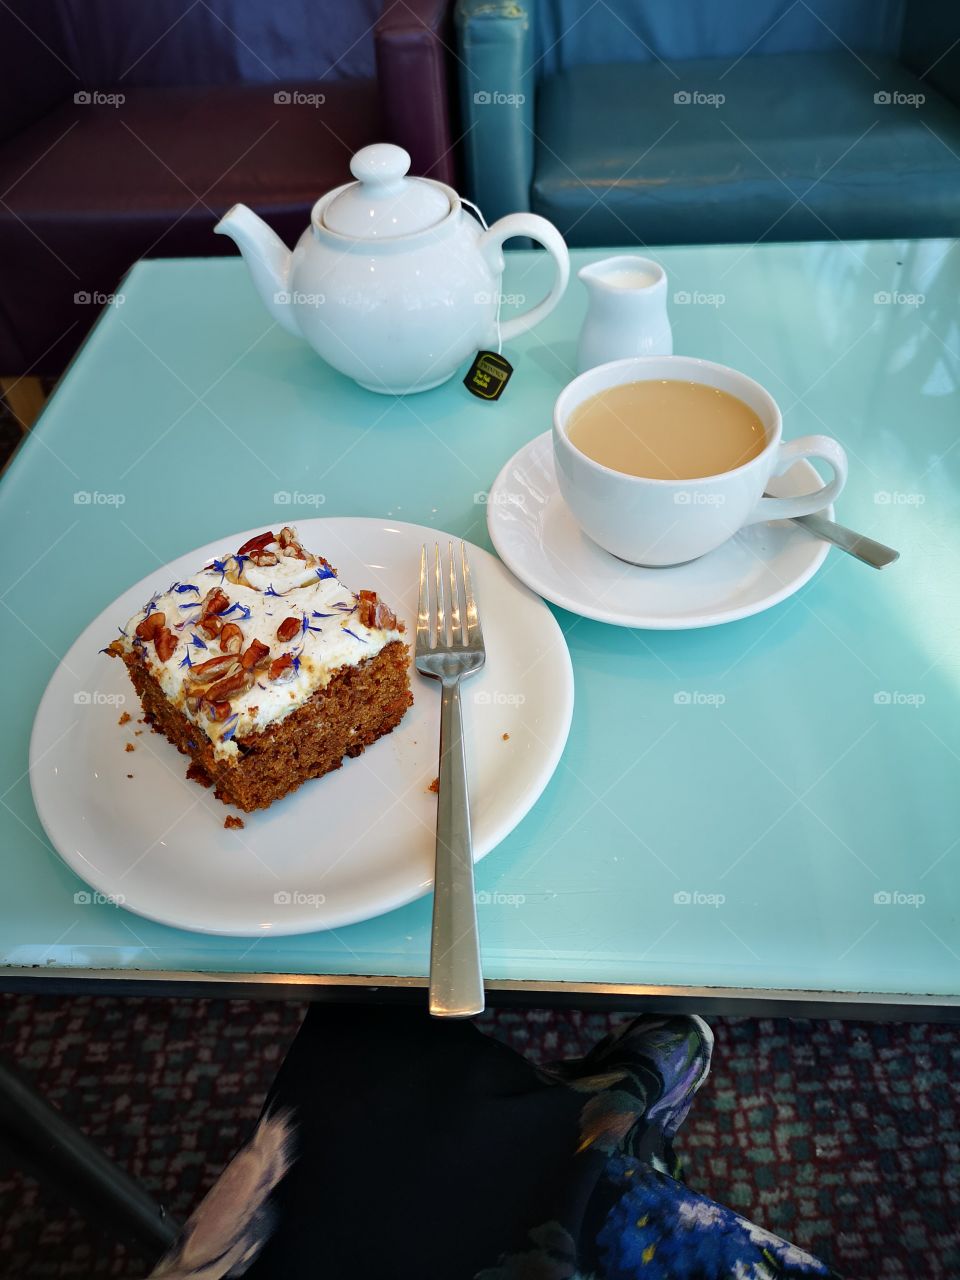 Afternoon tea with carrot cake